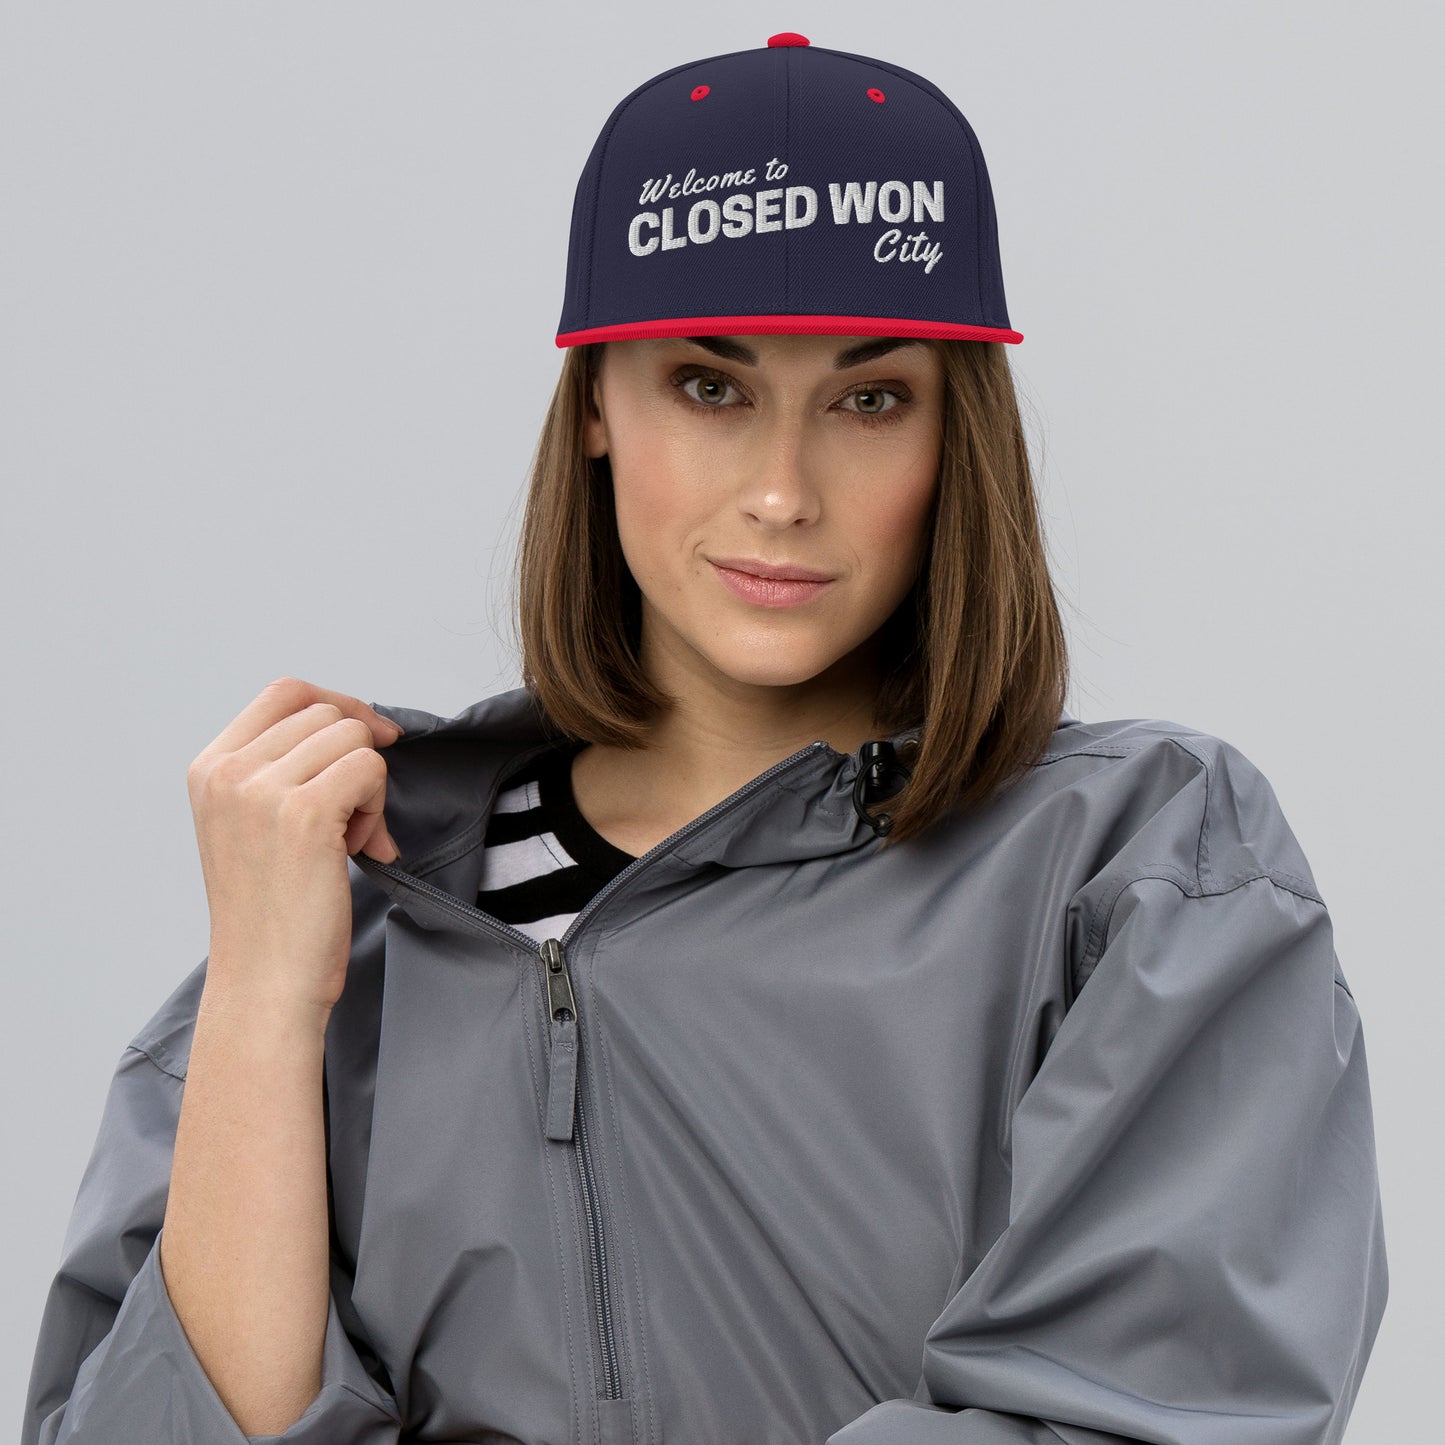 Welcome to Closed Won City Snapback Hat